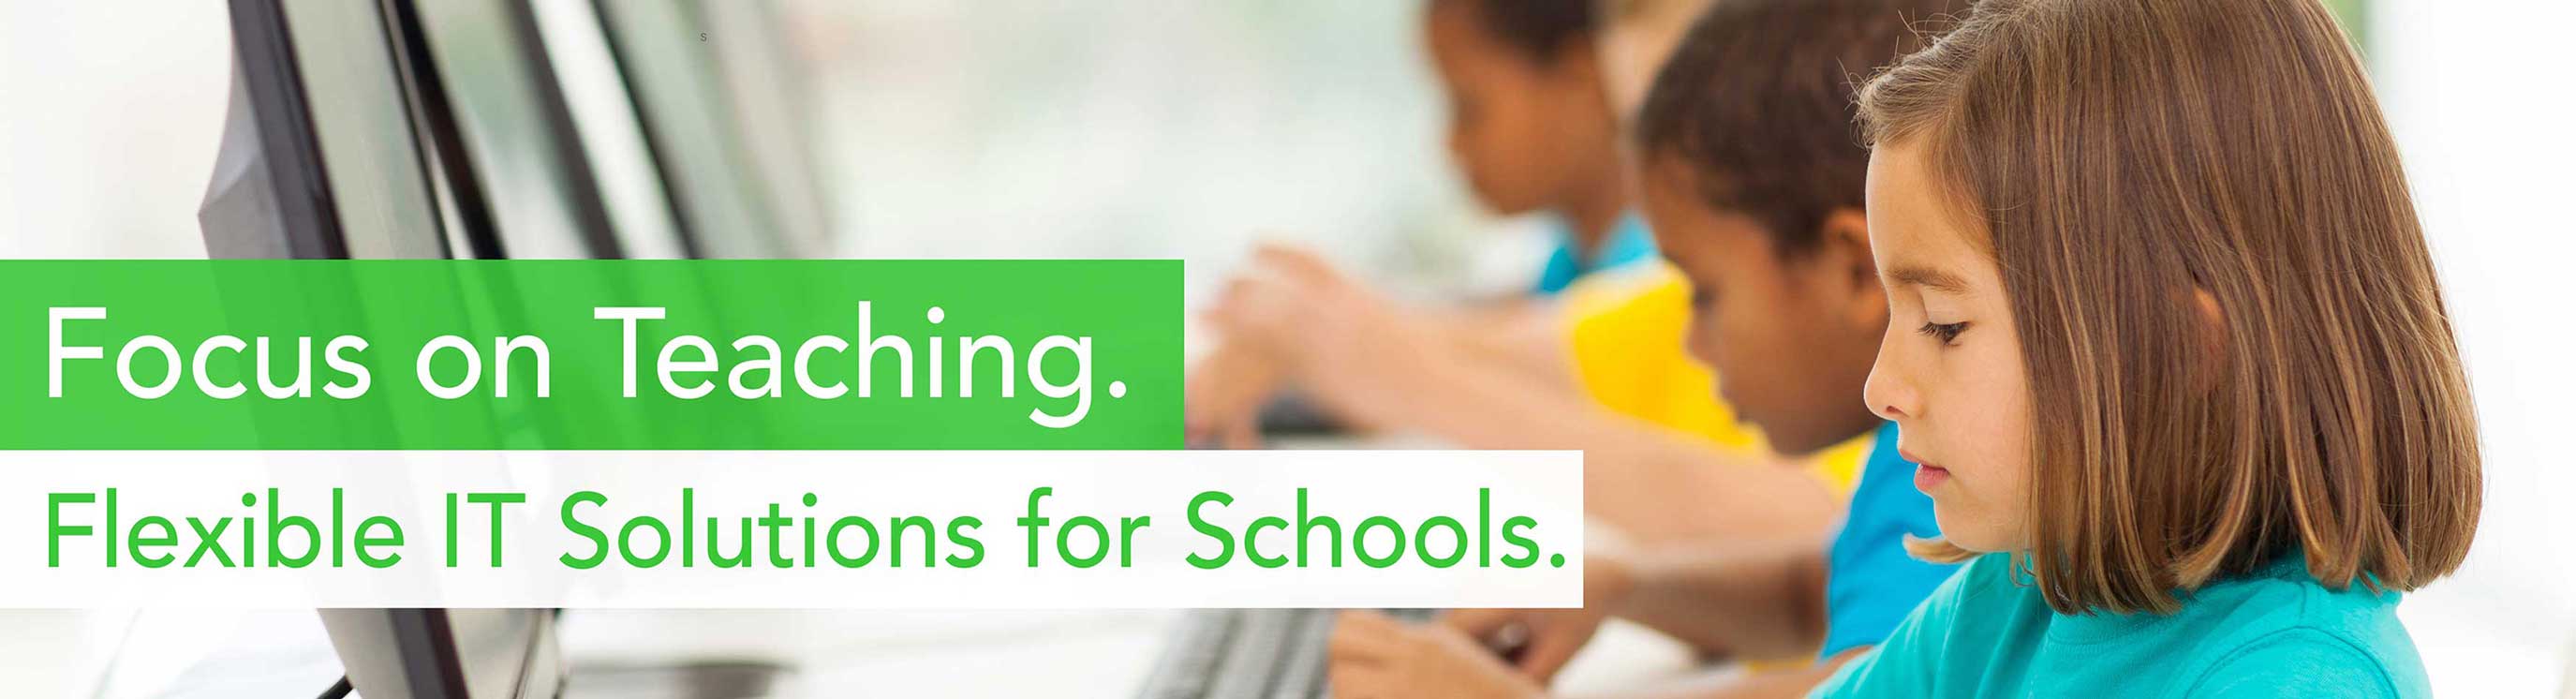 IT Support for Schools - auxitsolutions.co.uk